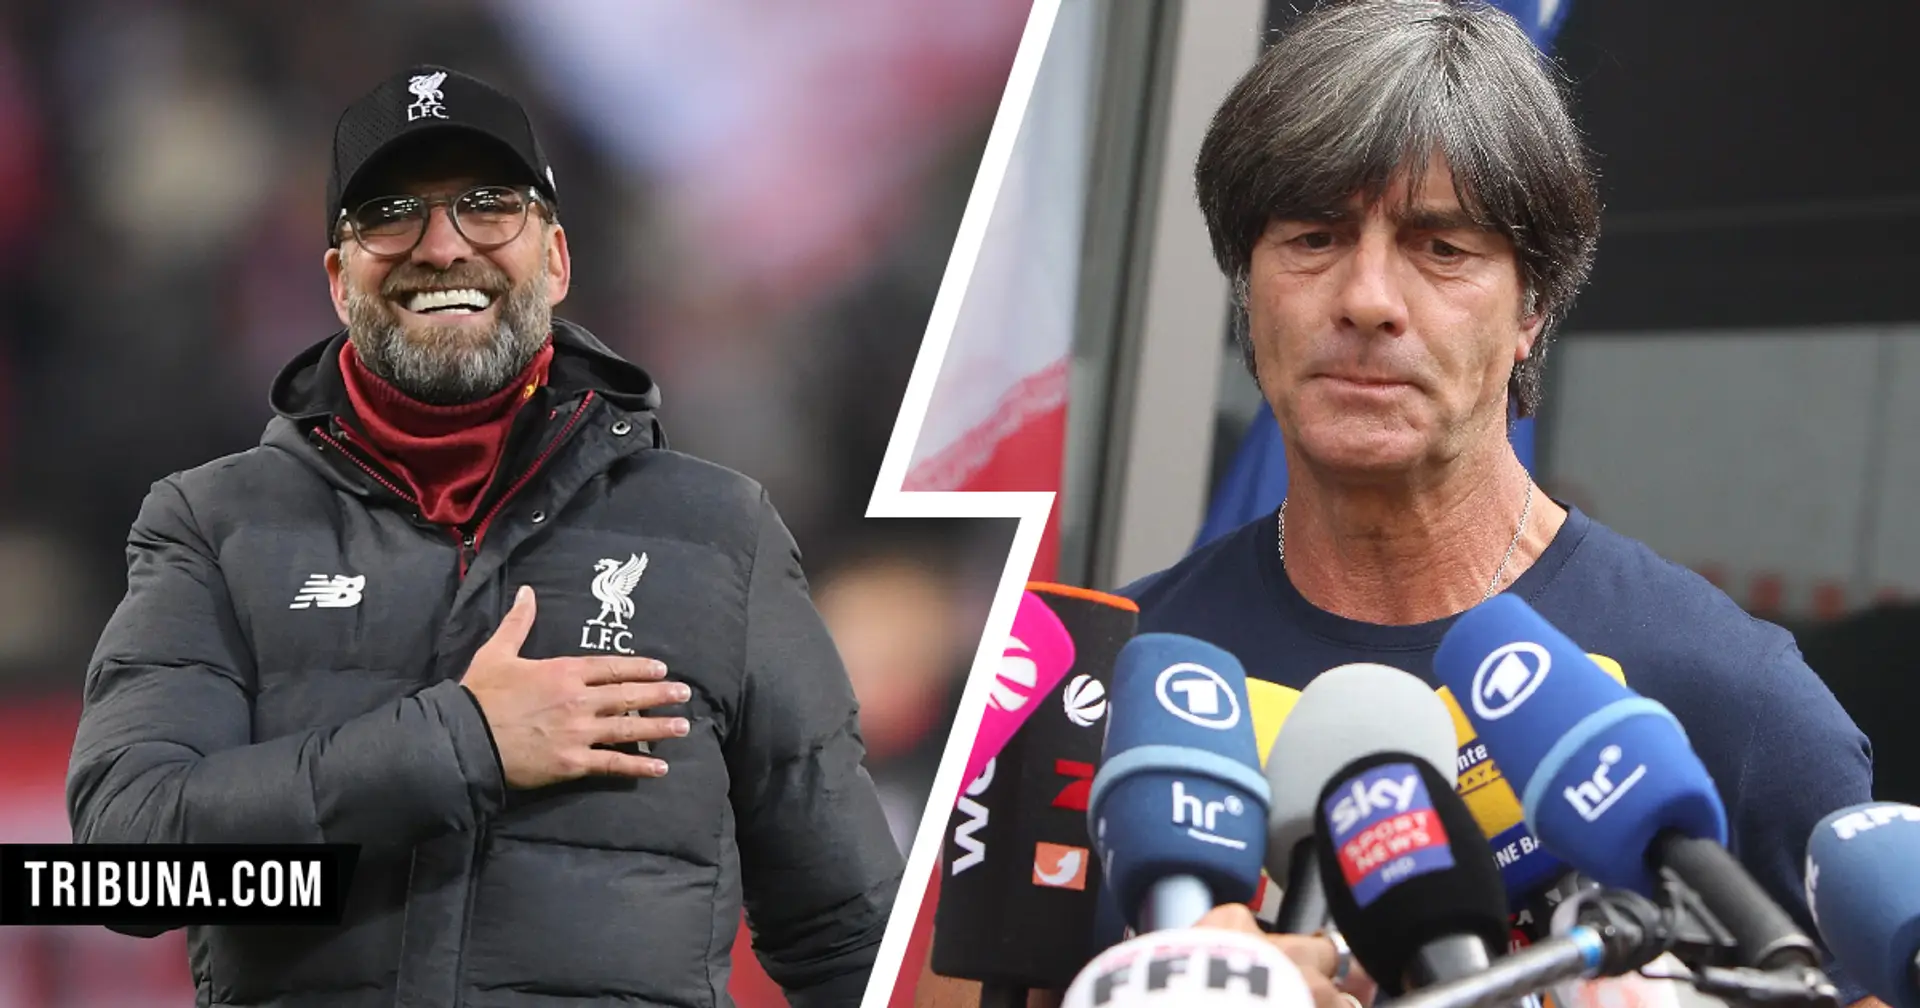 Liverpool fan provides interesting reason why Klopp won't become Germany manager